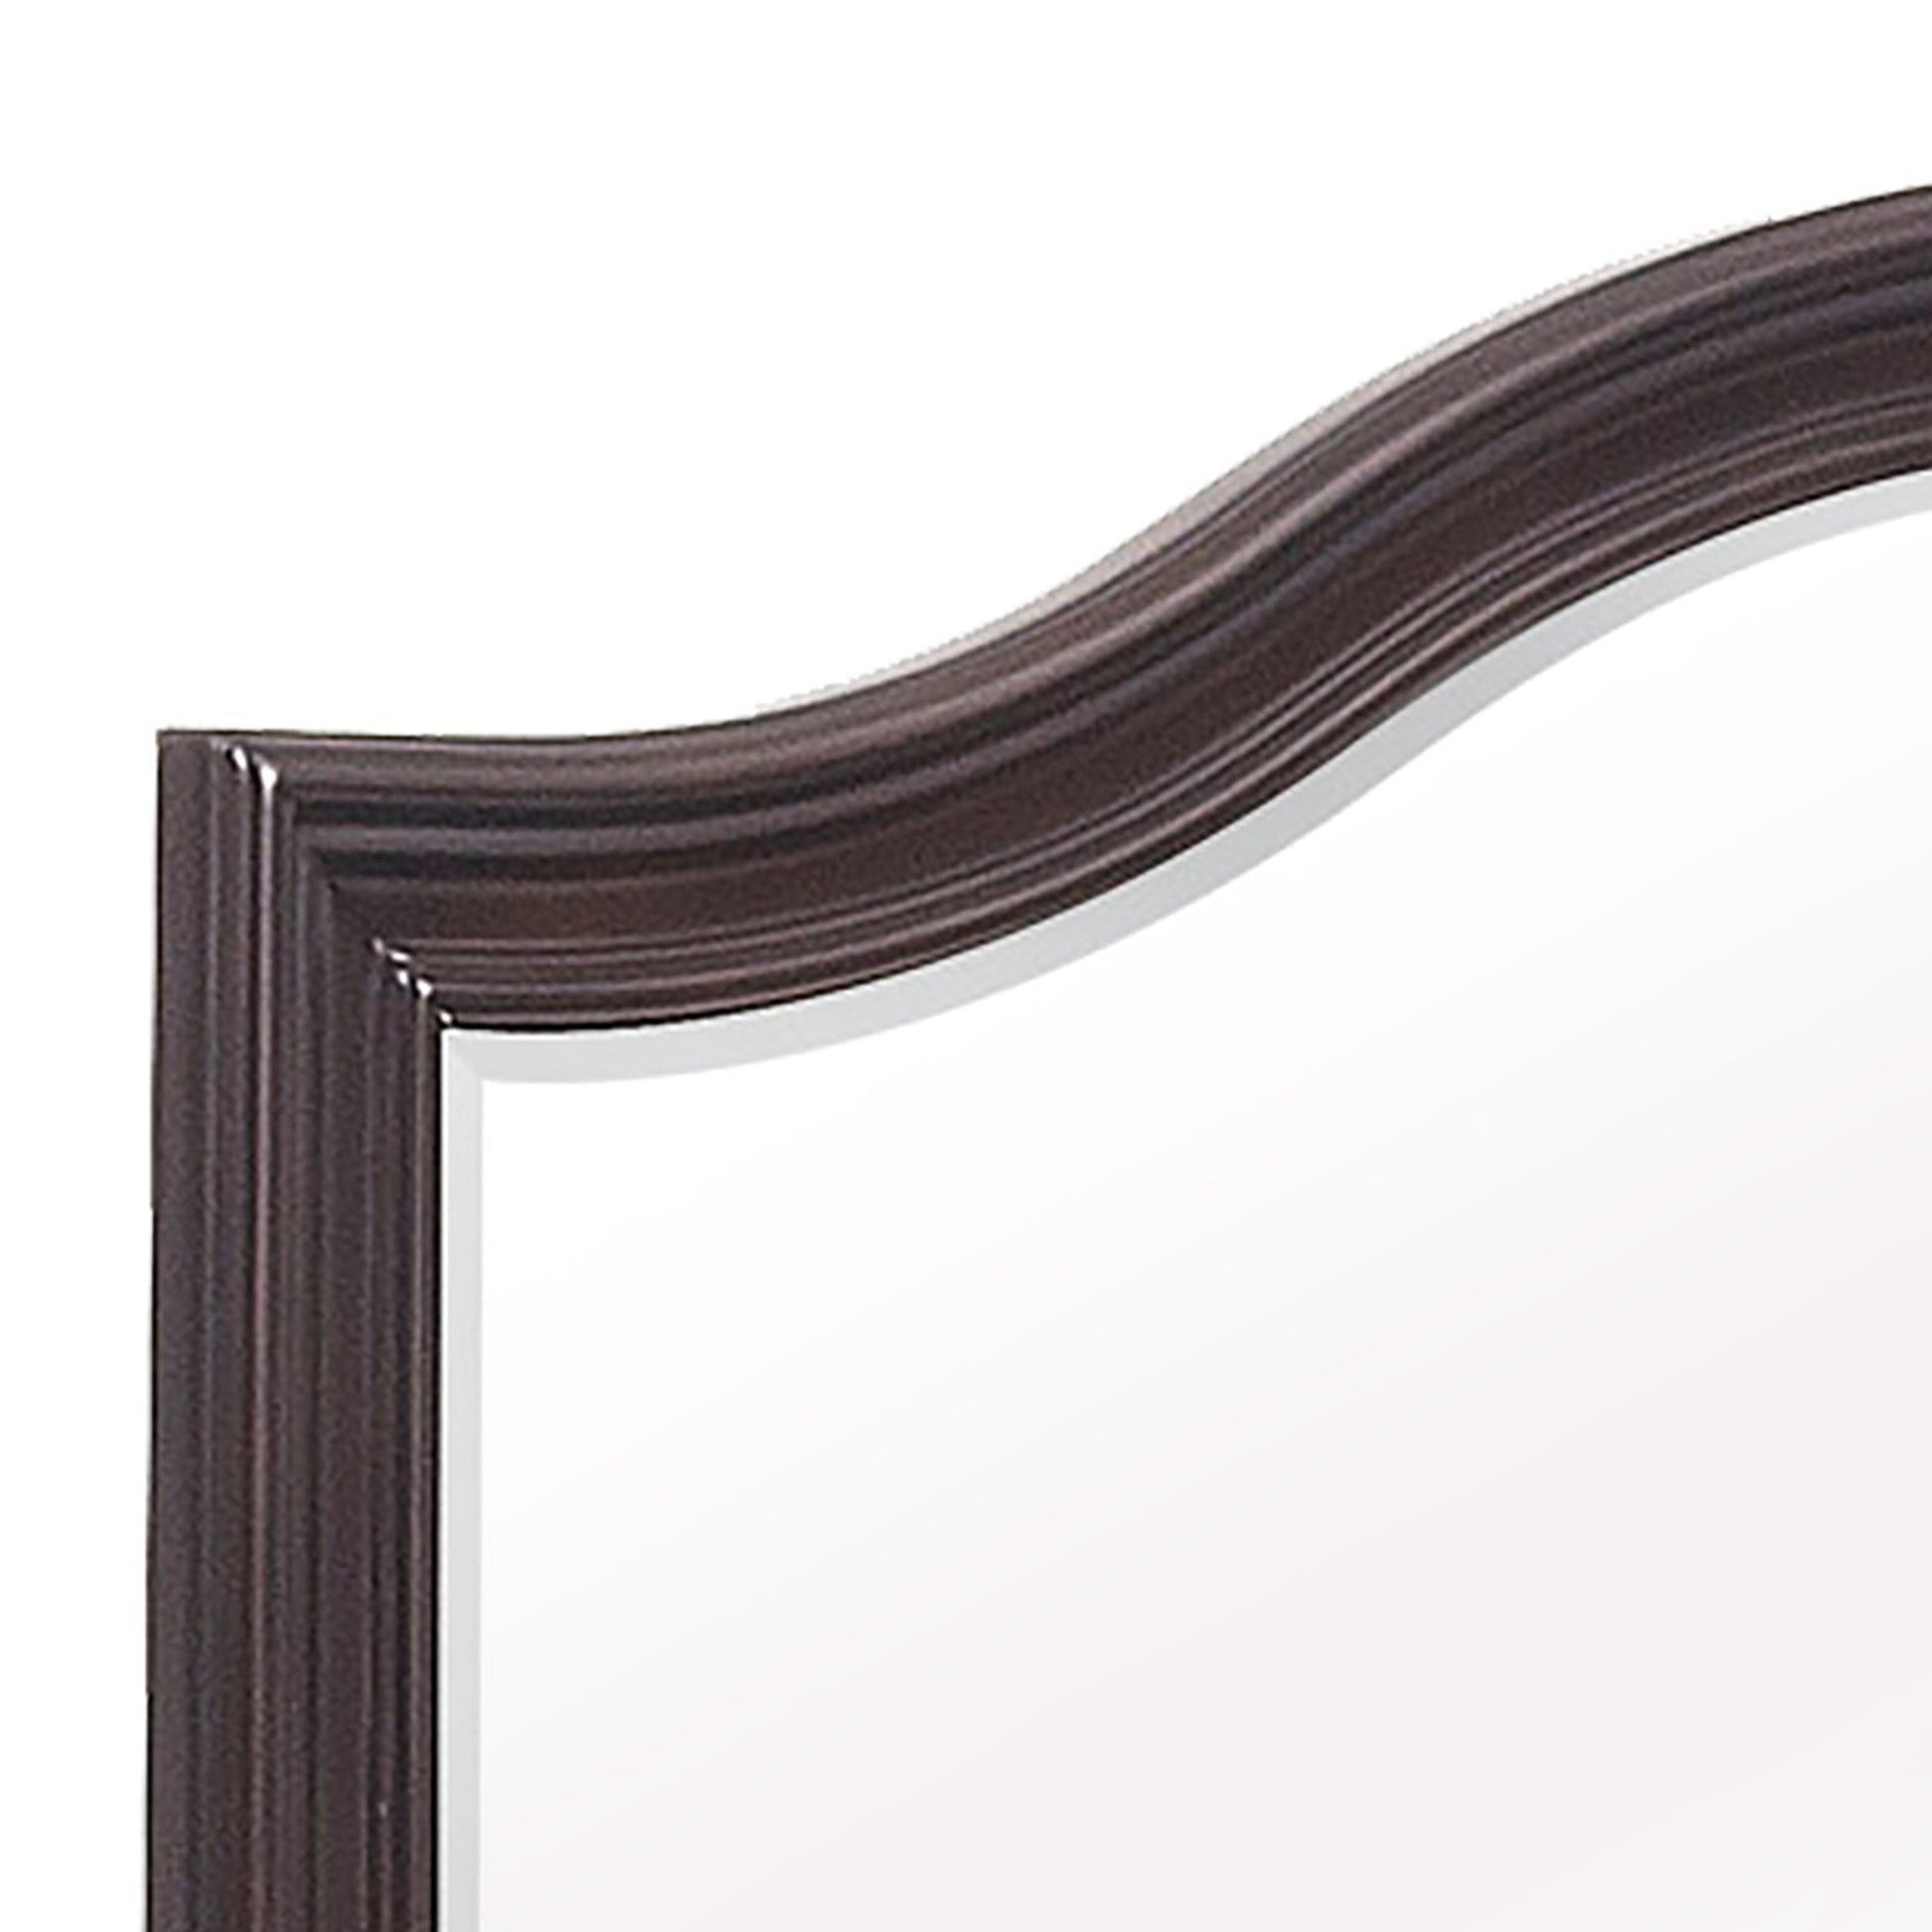 Benzara Brown Wooden Mirror With Molded Details and Raised Edges